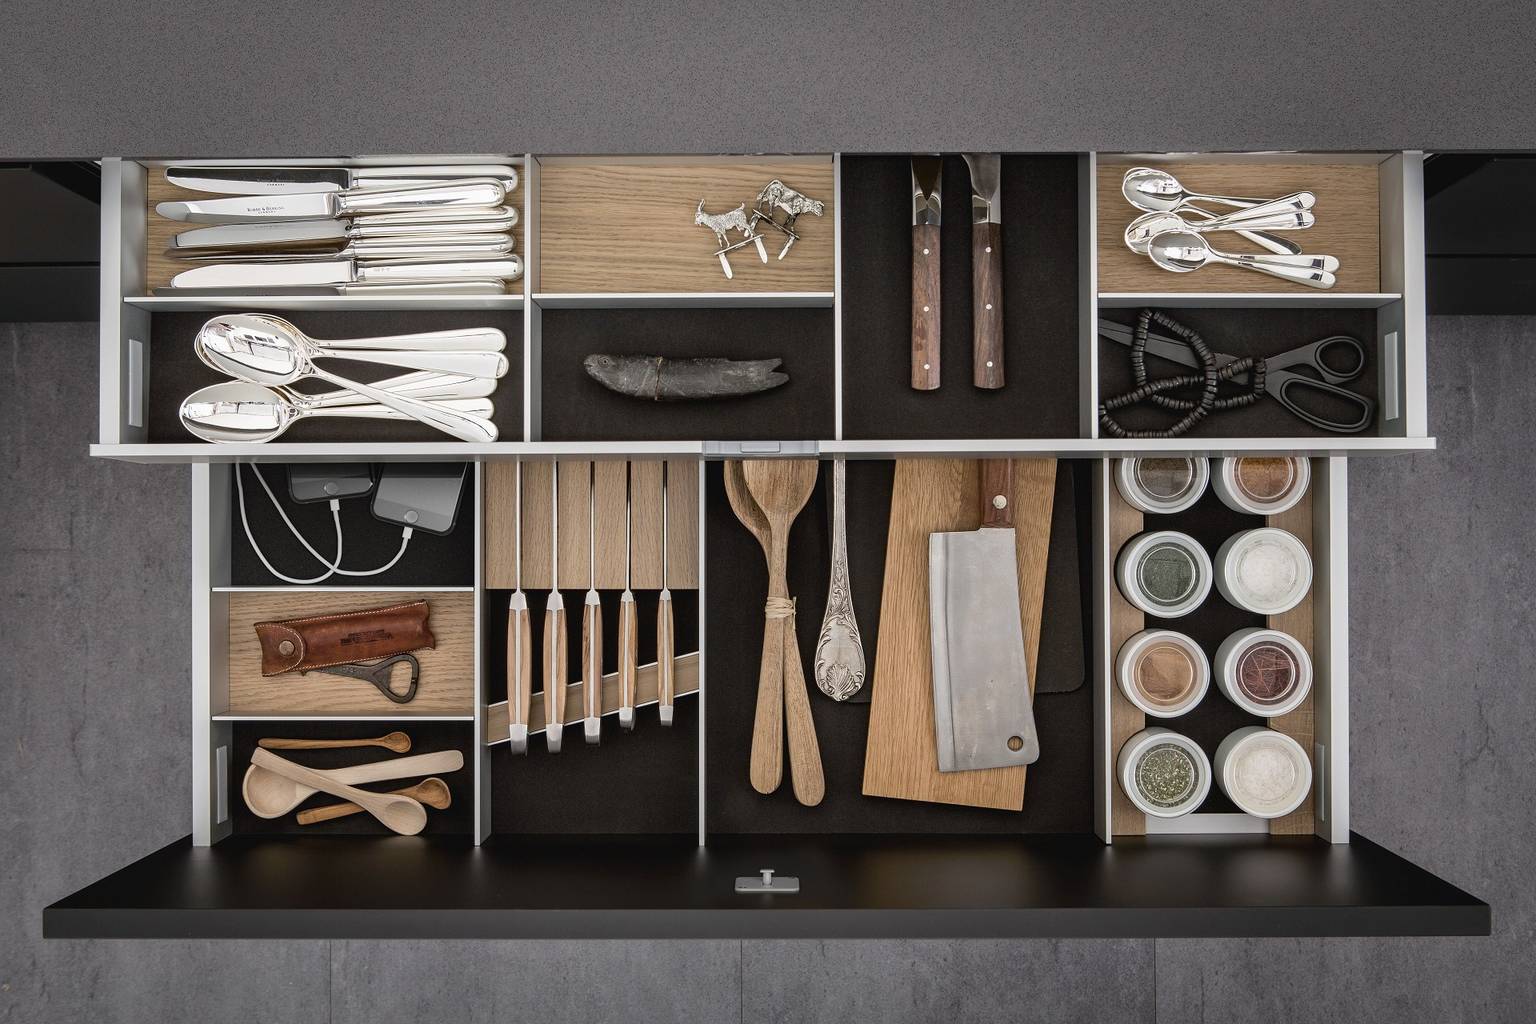 Cutlery inserts, porcelain jars, knife block and USB charging station for iPhones inside SieMatic drawers